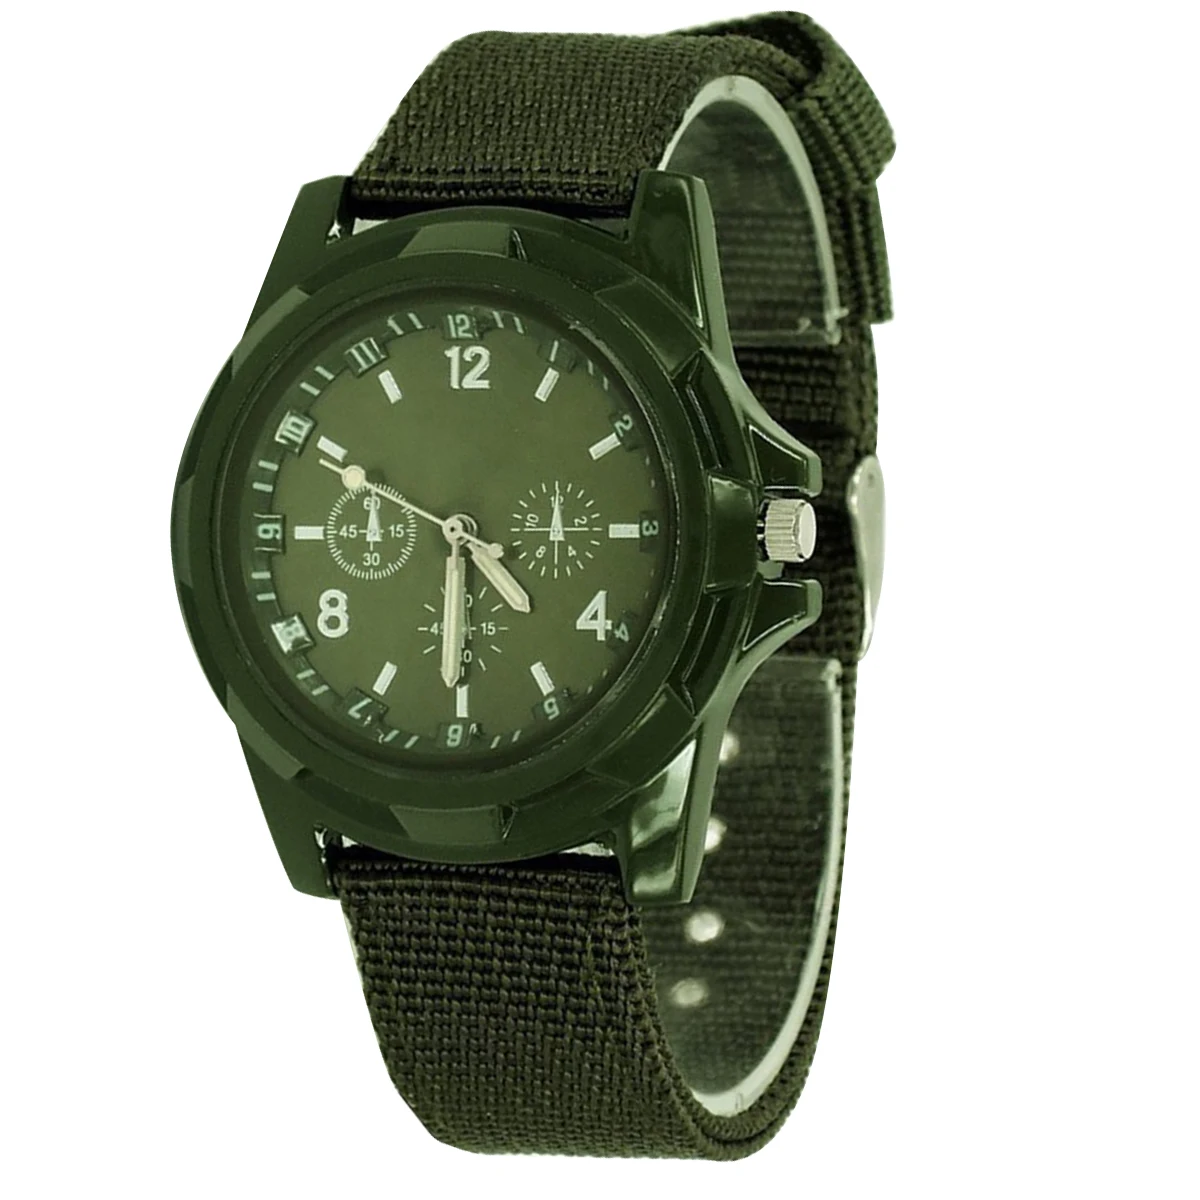 Men Watch Army Soldier Military Canvas Strap Fabric Analog Wrist Watches... - $14.94